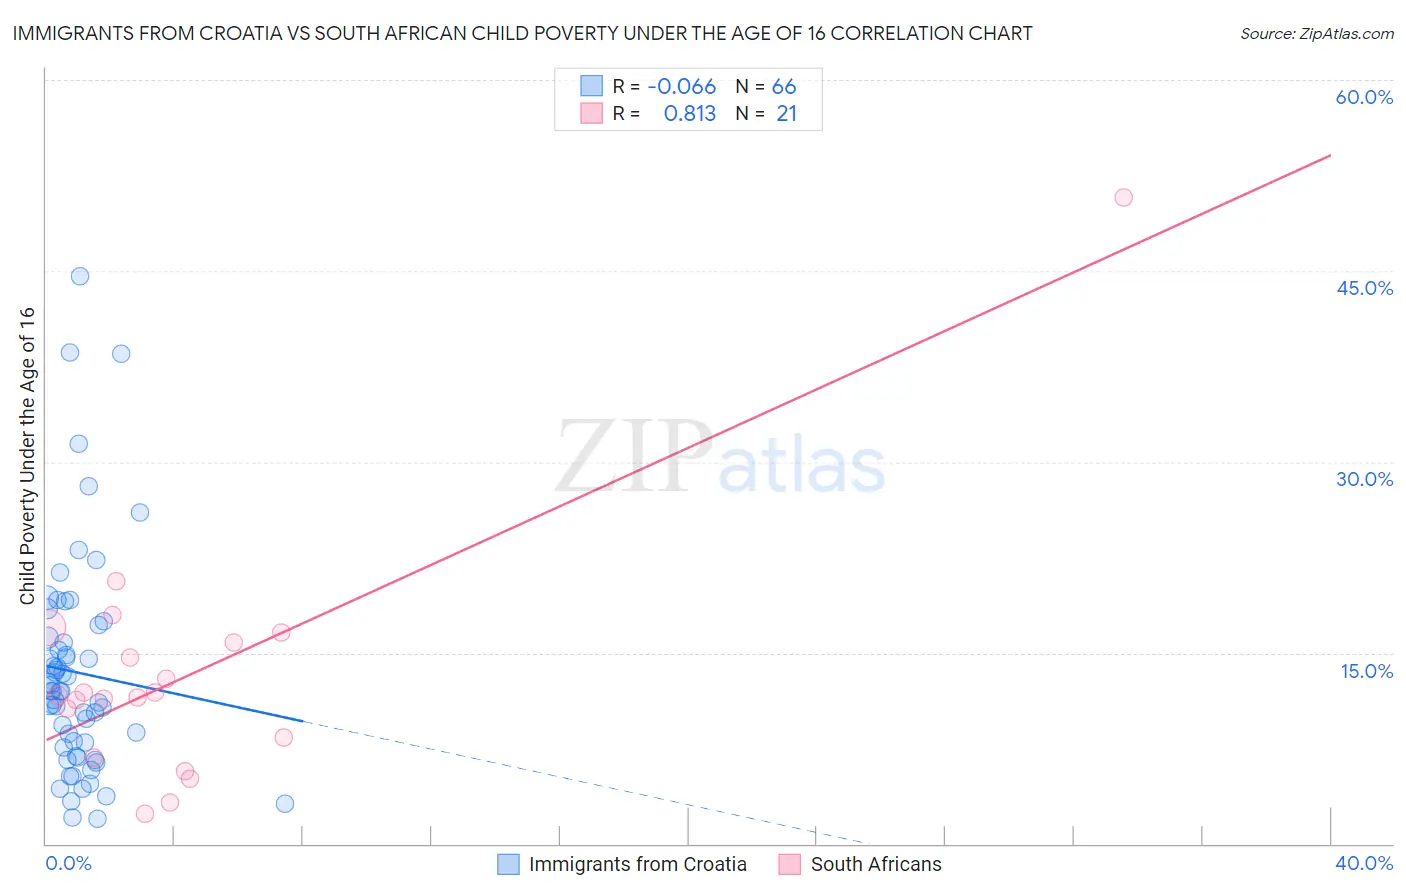 Immigrants from Croatia vs South African Child Poverty Under the Age of 16